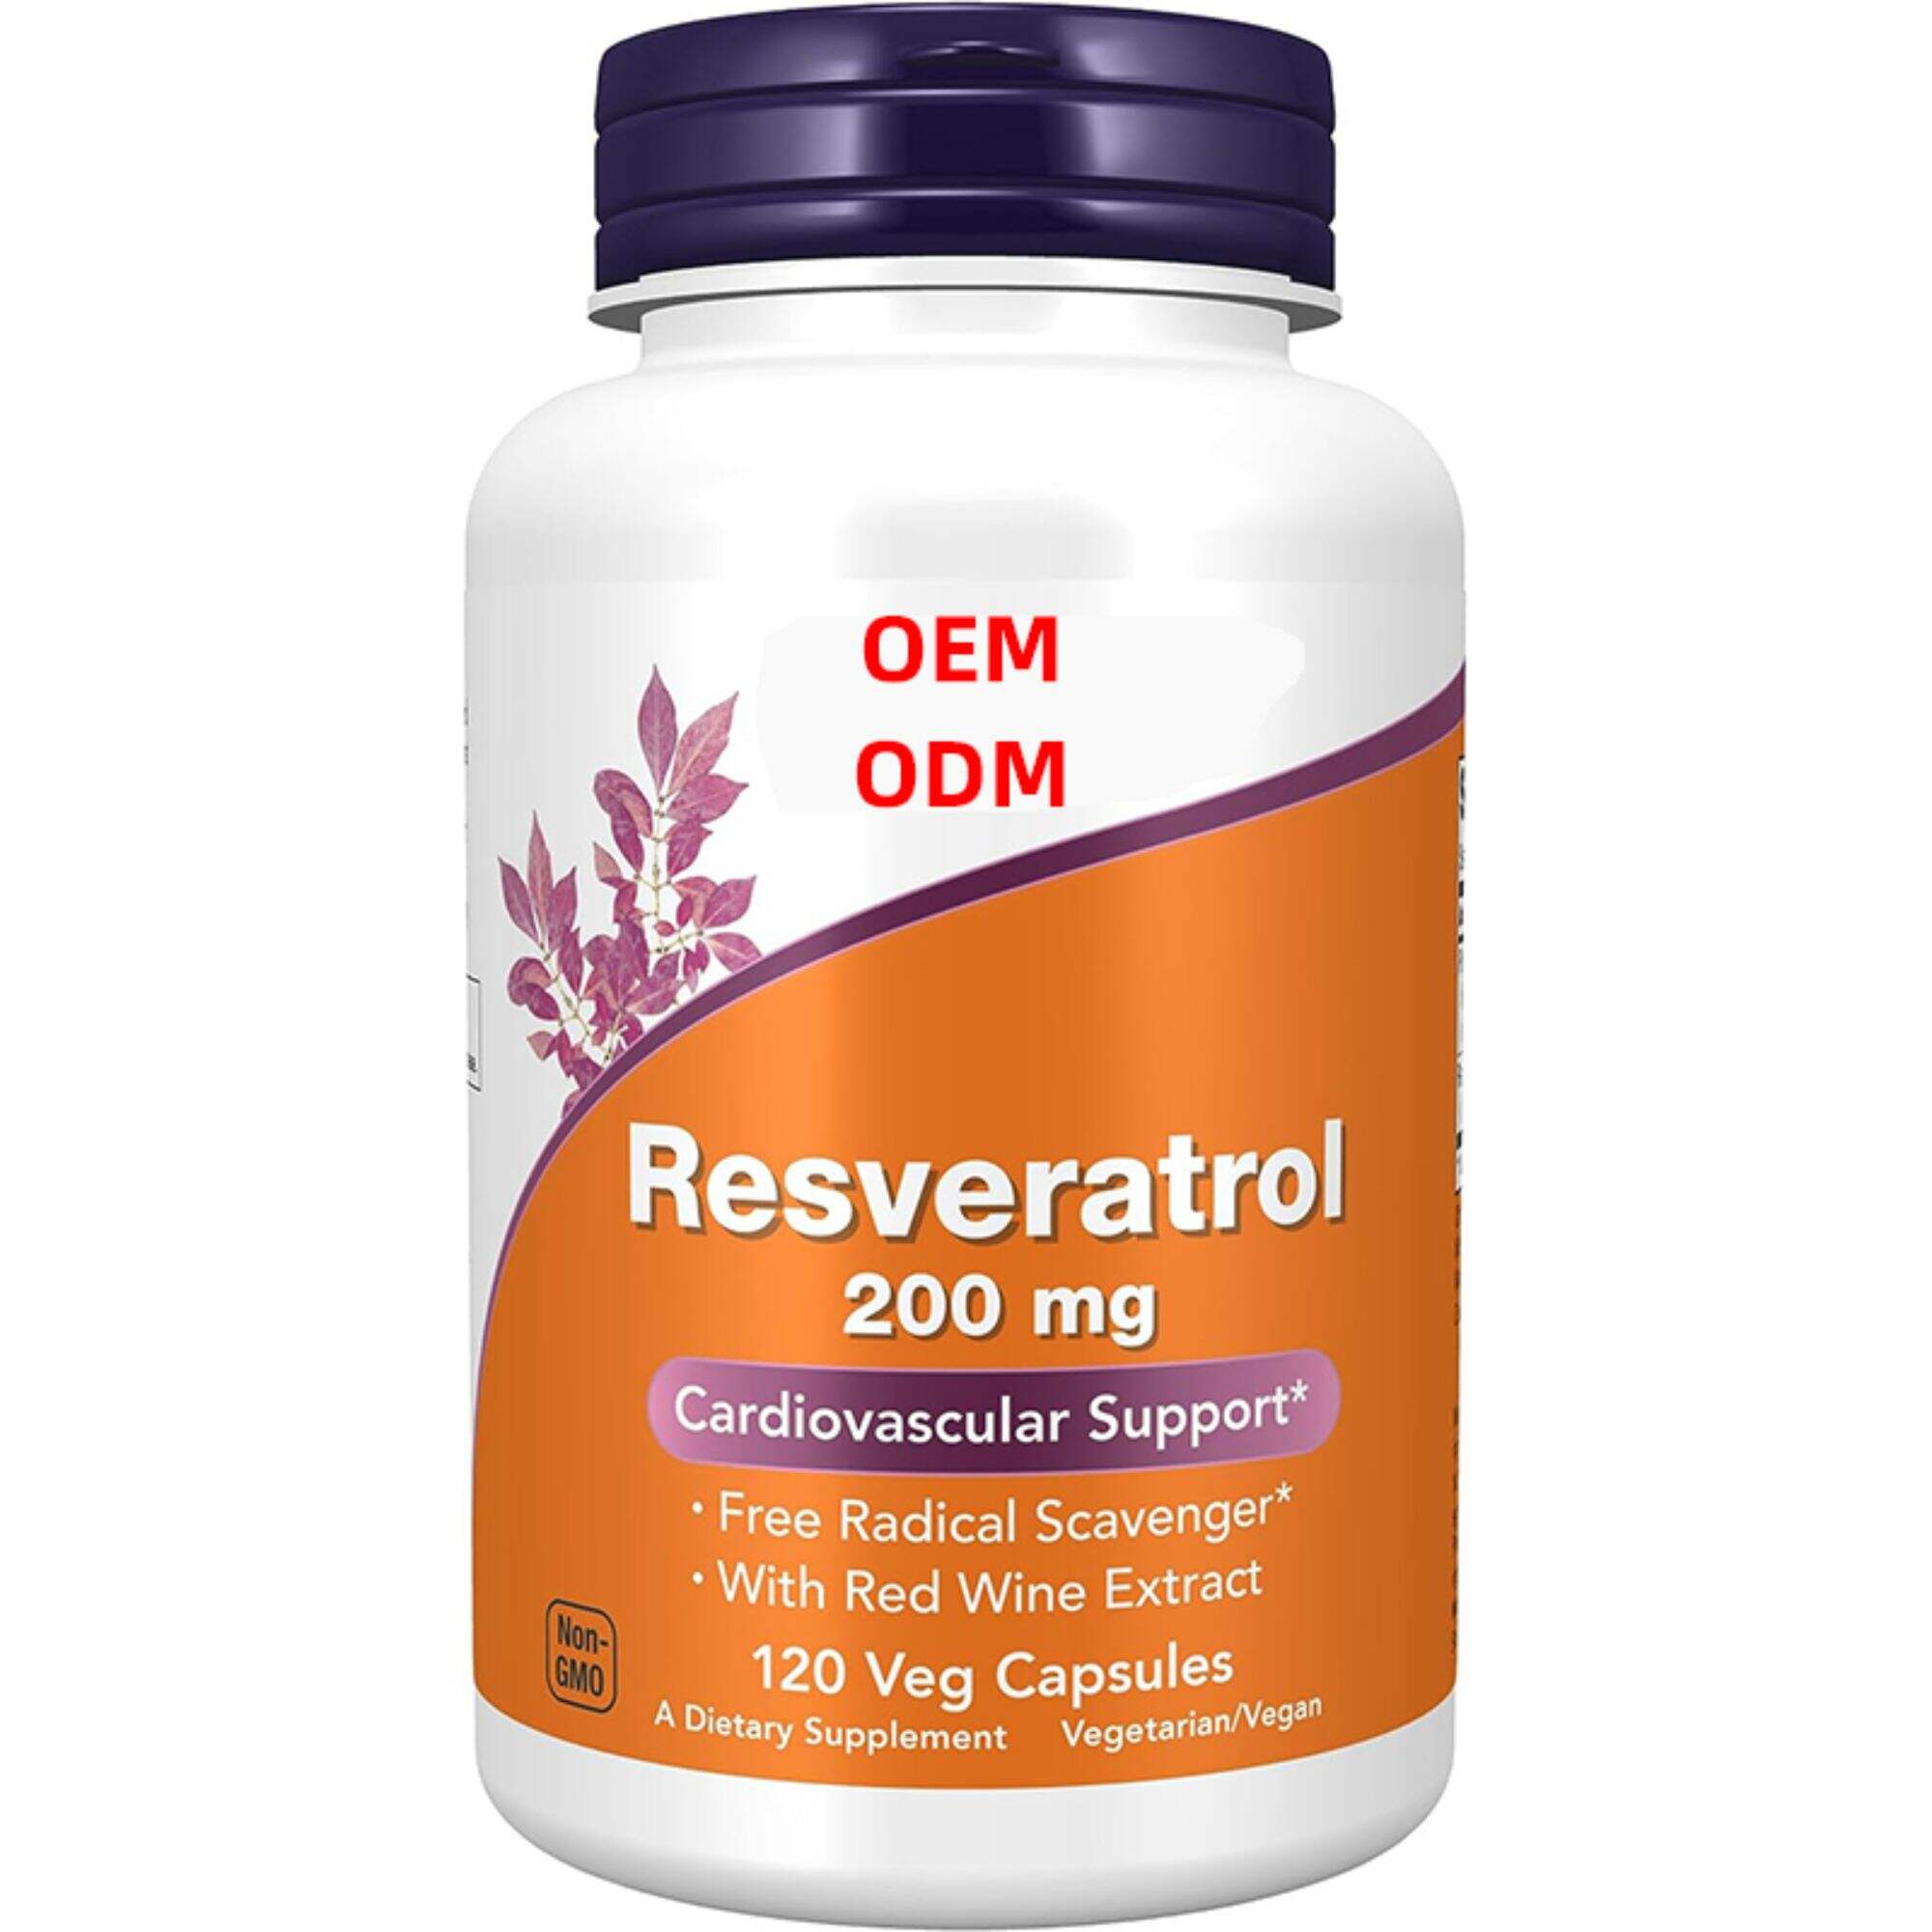 Natural Resveratrol 200 mg Healthcare Supplements with Red Wine Extract, 120 Veg Capsules